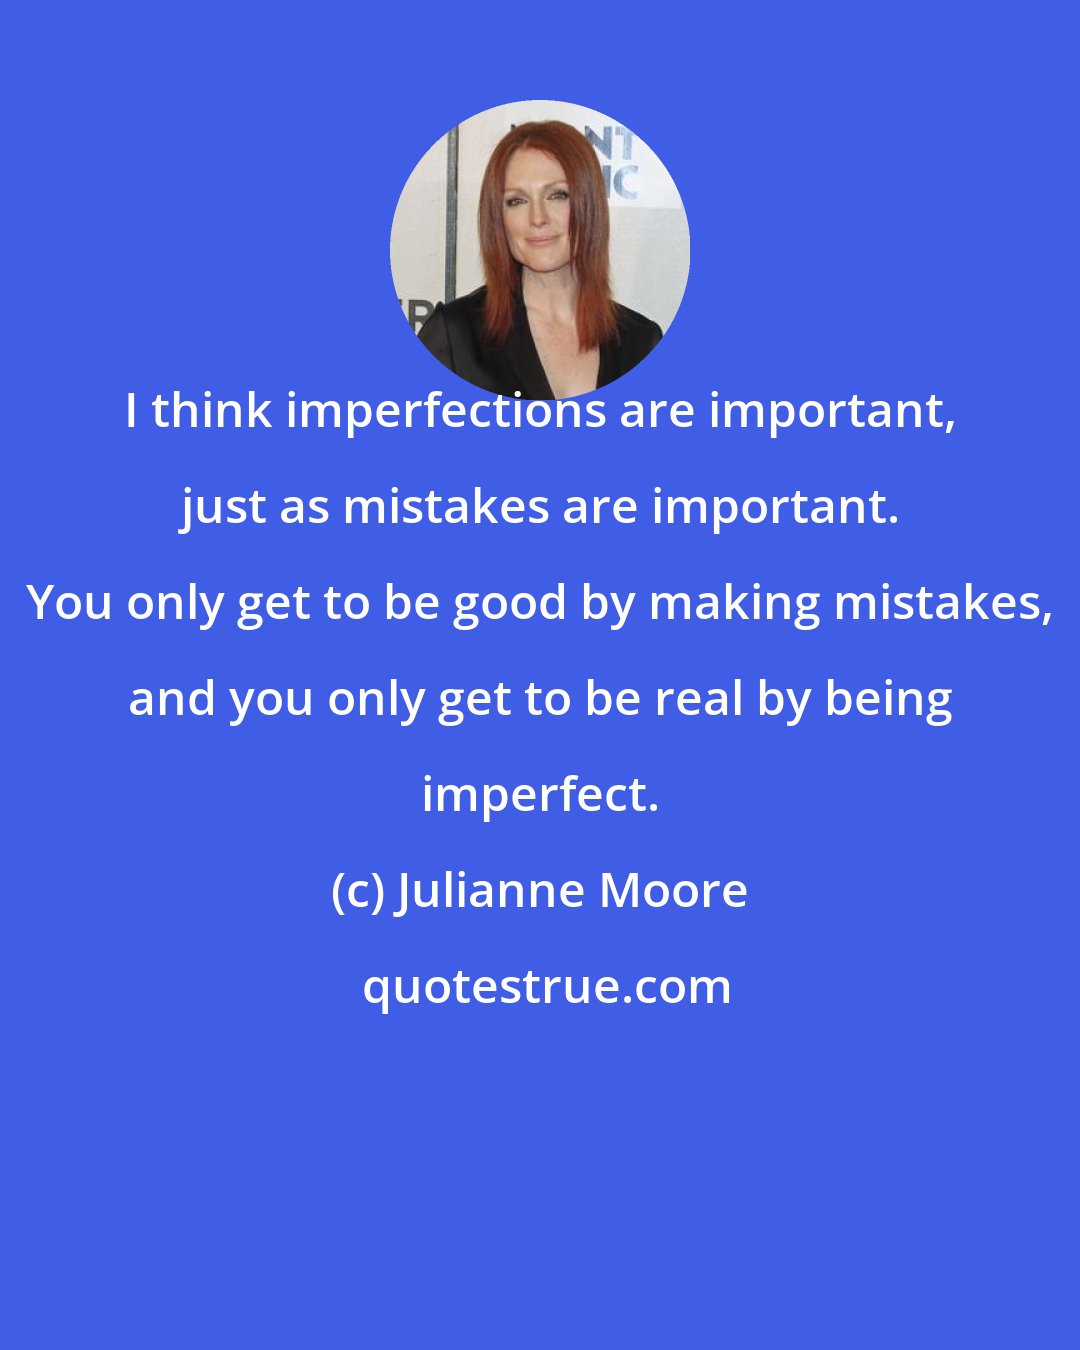 Julianne Moore: I think imperfections are important, just as mistakes are important. You only get to be good by making mistakes, and you only get to be real by being imperfect.